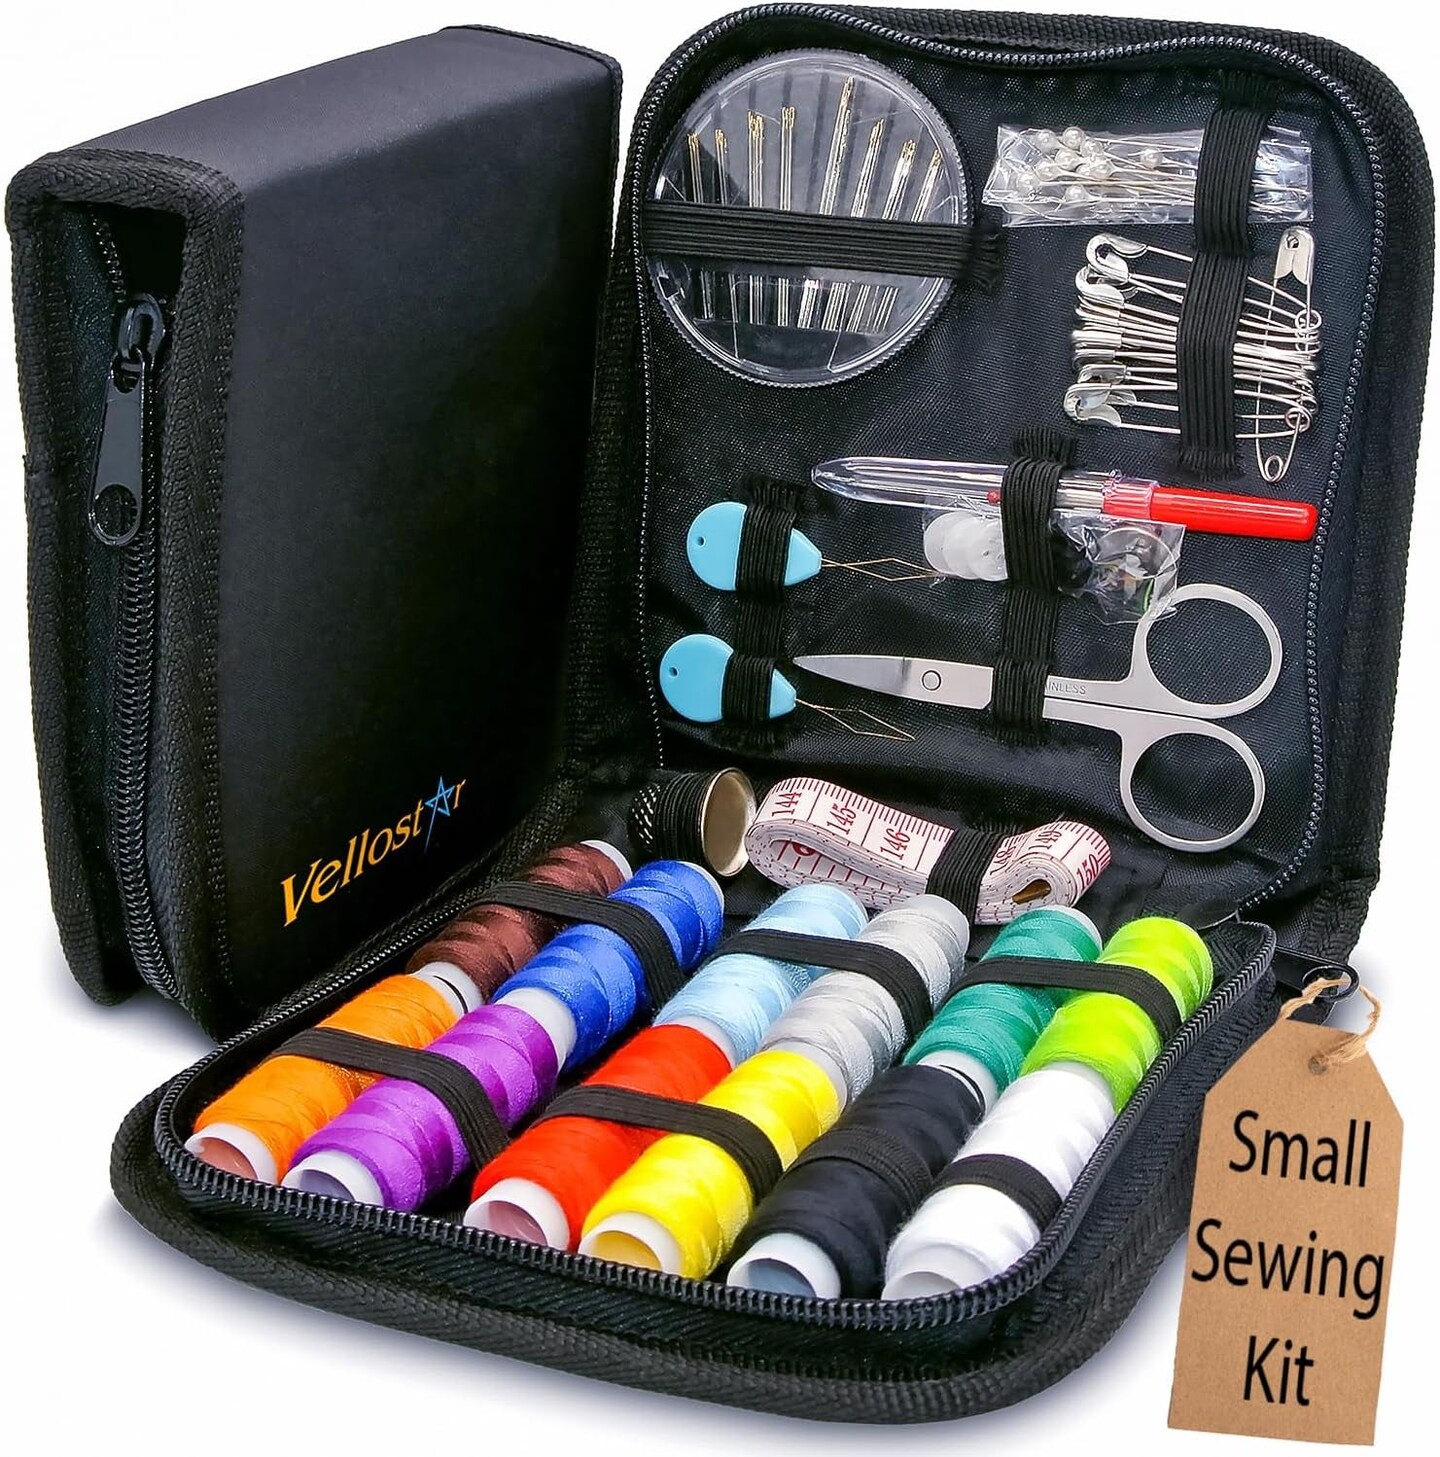  Easy to Use Sewing Kit for Adults - Over 100 Sewing Supplies  and Accessories, Needle and Thread Kit for Mending - Basic Hand Sewing Kits  for Small Fixes, Travel Sewing Kit